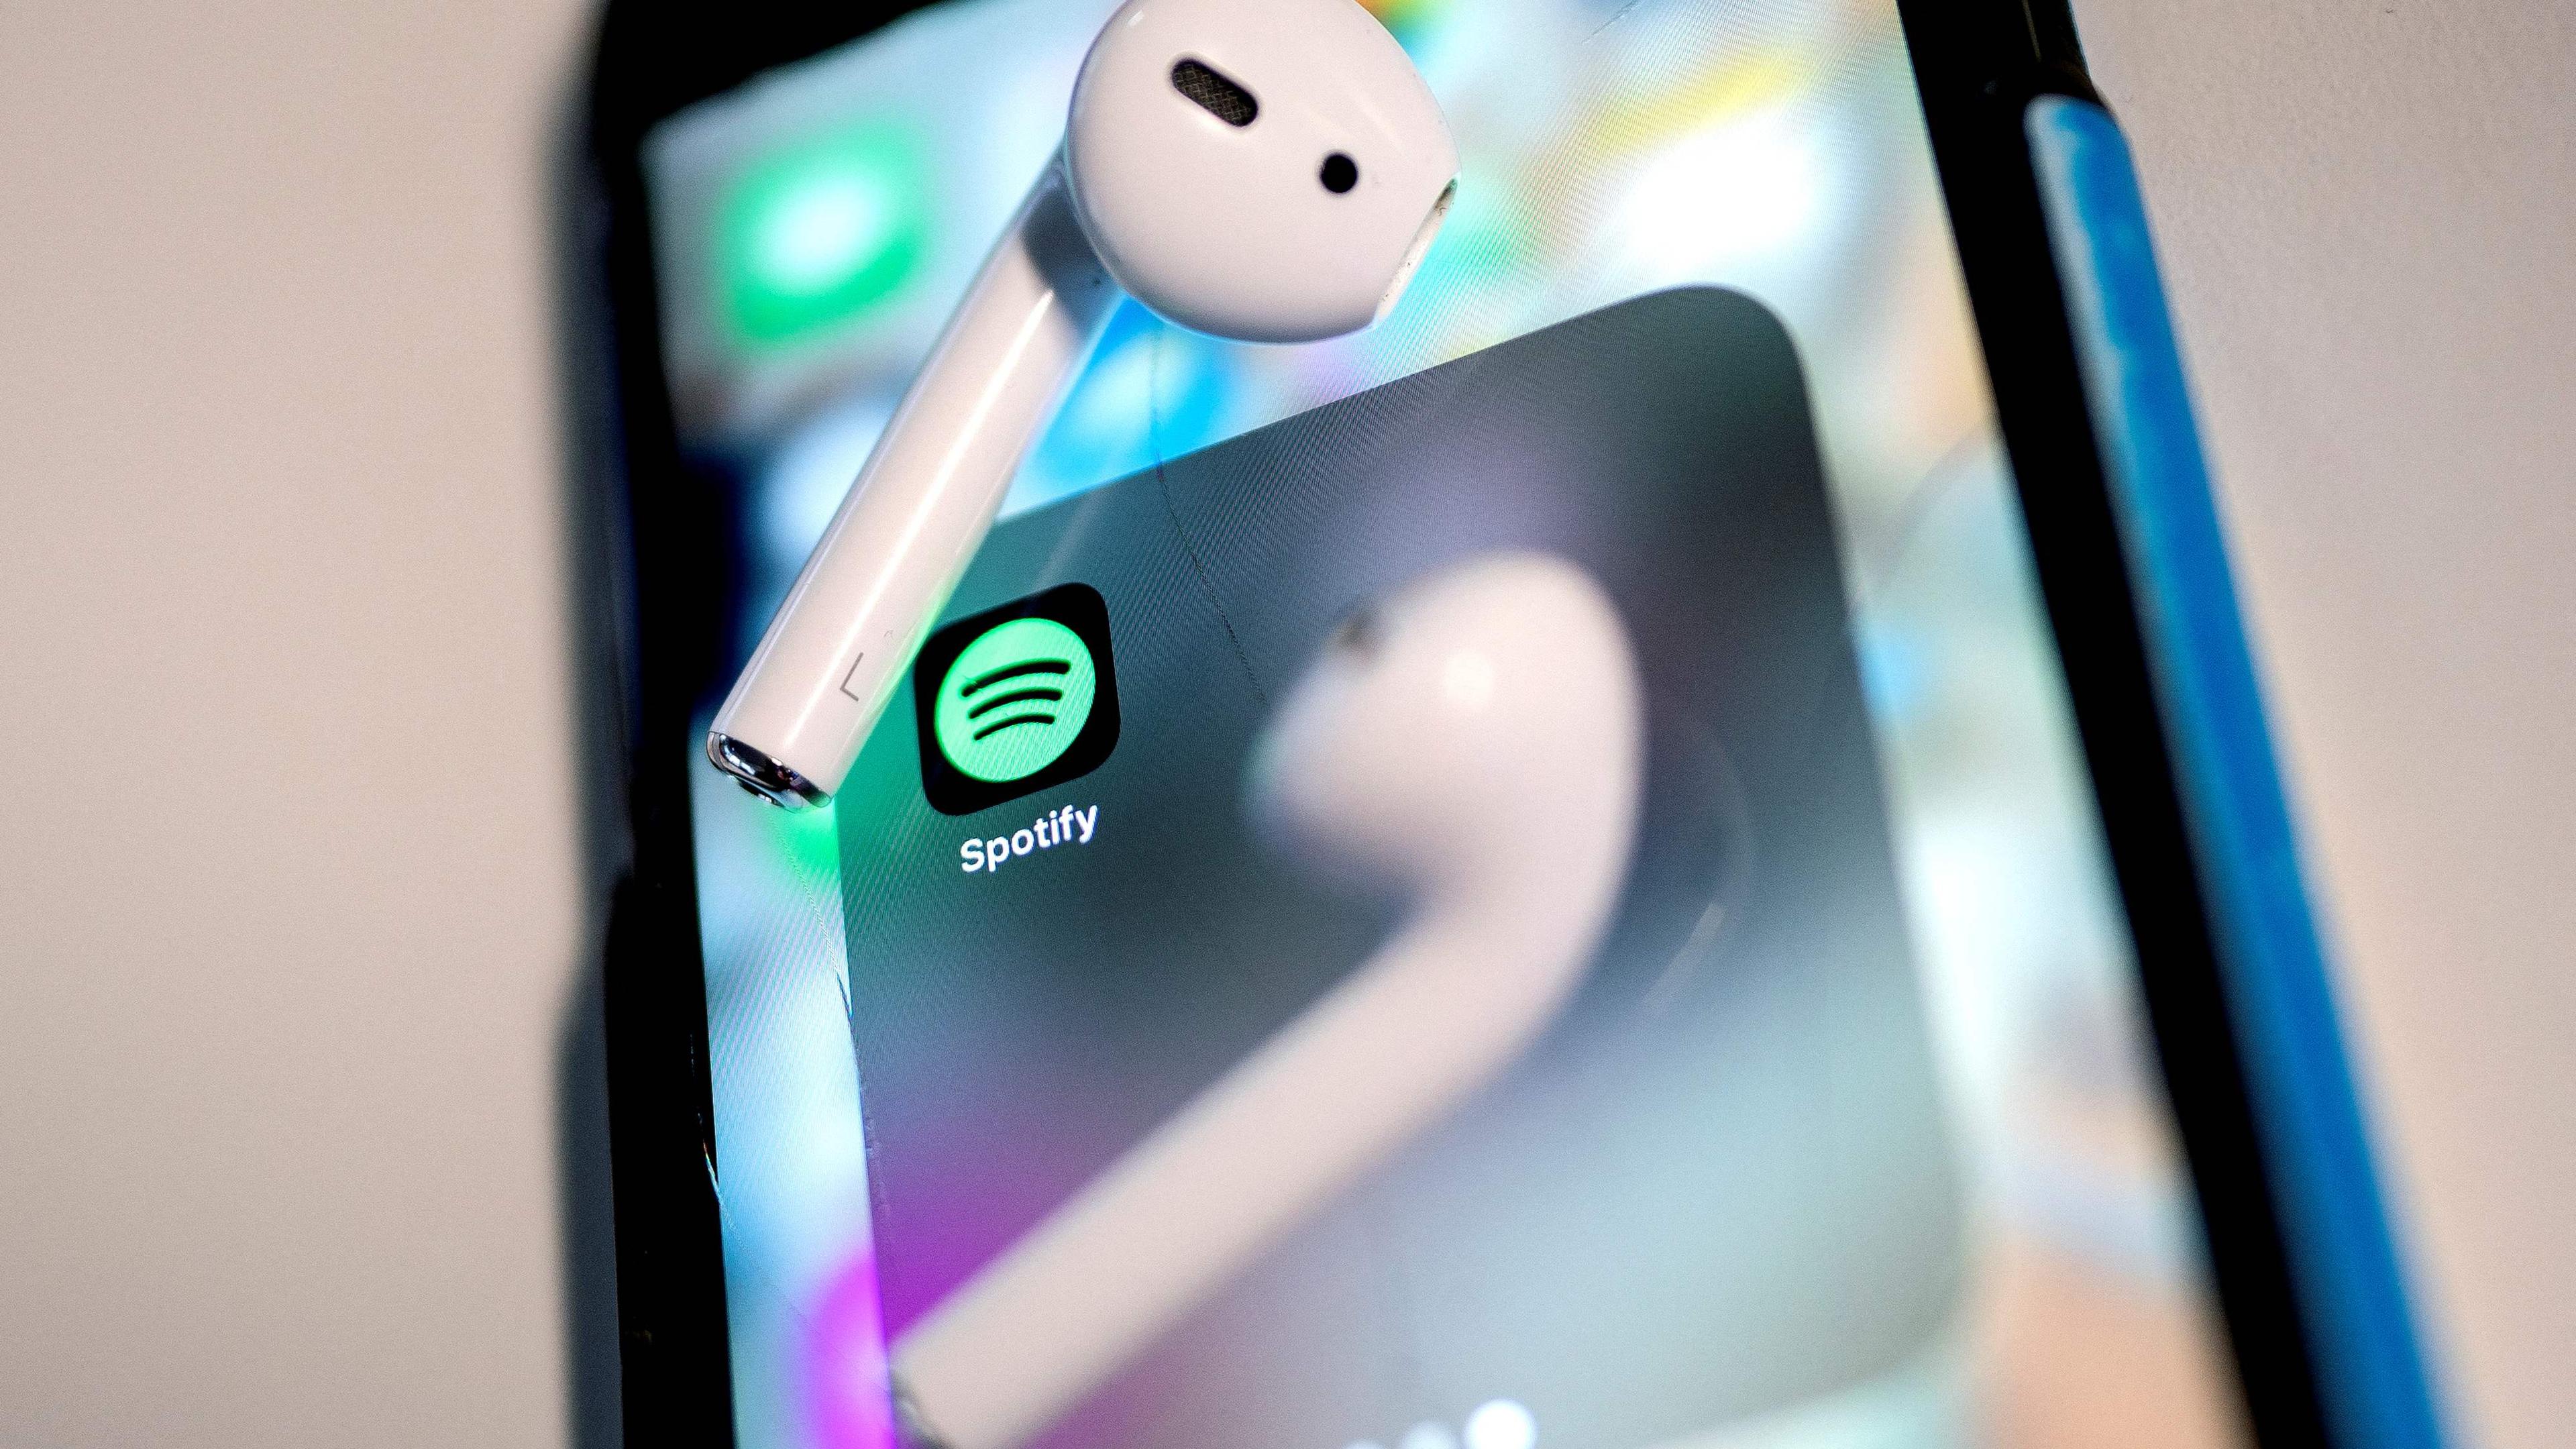 (FILES) This illustration photo shows the Spotify logo on a smartphone in Washington, DC, on January 31, 2022. Music streaming giant Spotify said on December 4, 2023 that it will reduce the number of its employees by around 17% in a bid to cut costs amid "dramatically" slower economic growth. Spotify in October posted a rare quarterly operating profit of 32 million euros, compared to a loss of 228 million for the same period a year earlier, on the back of 26% growth in active users for the third quarter. (Photo by Stefani Reynolds / AFP)